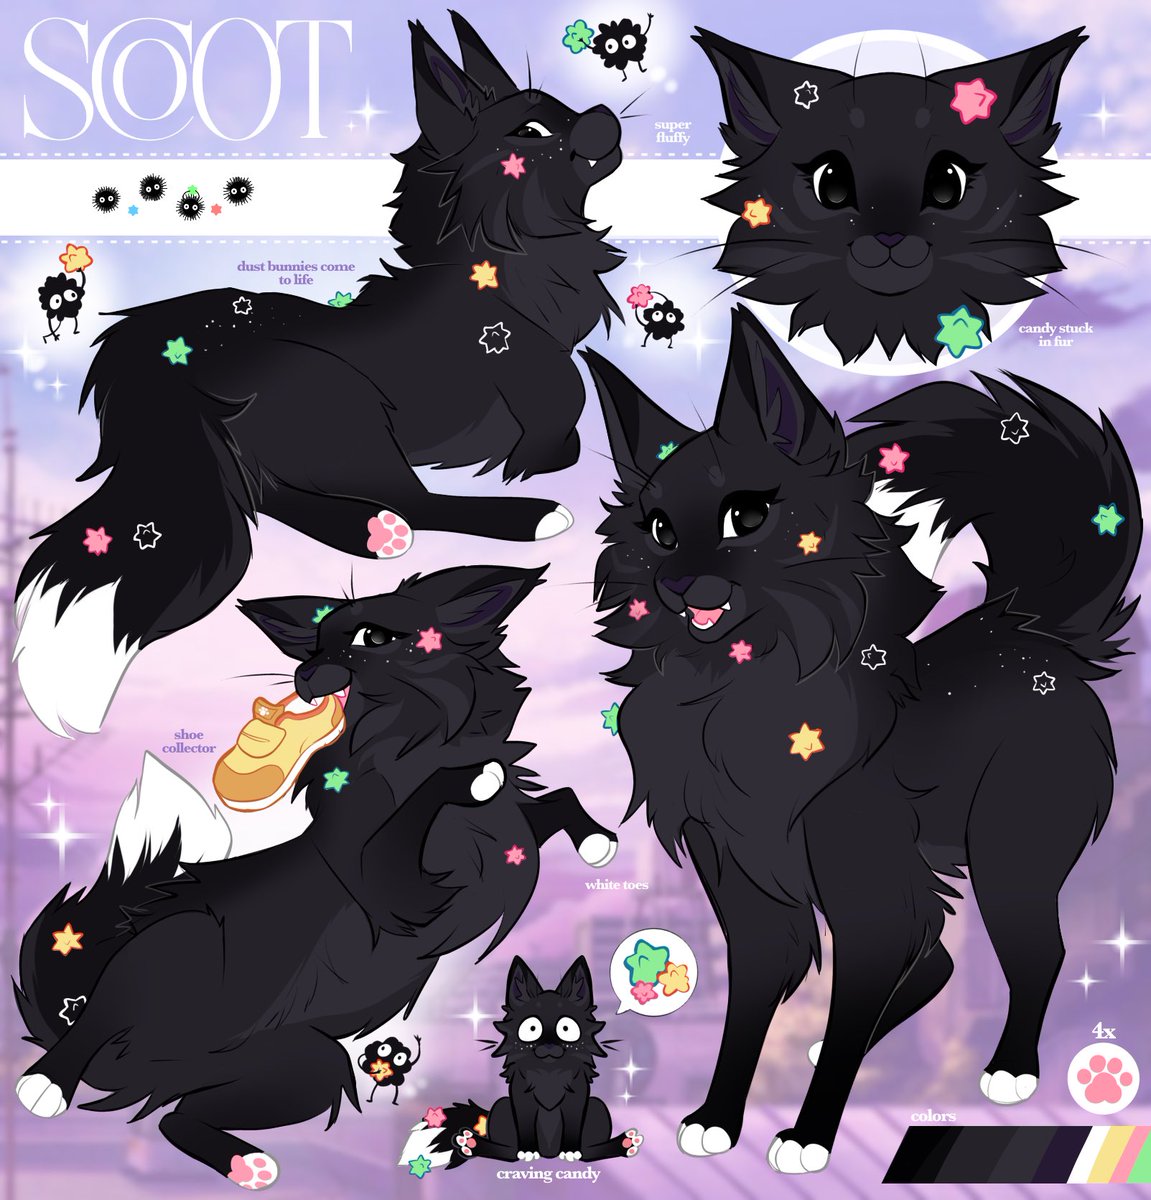 soot + mainecoon = scoot